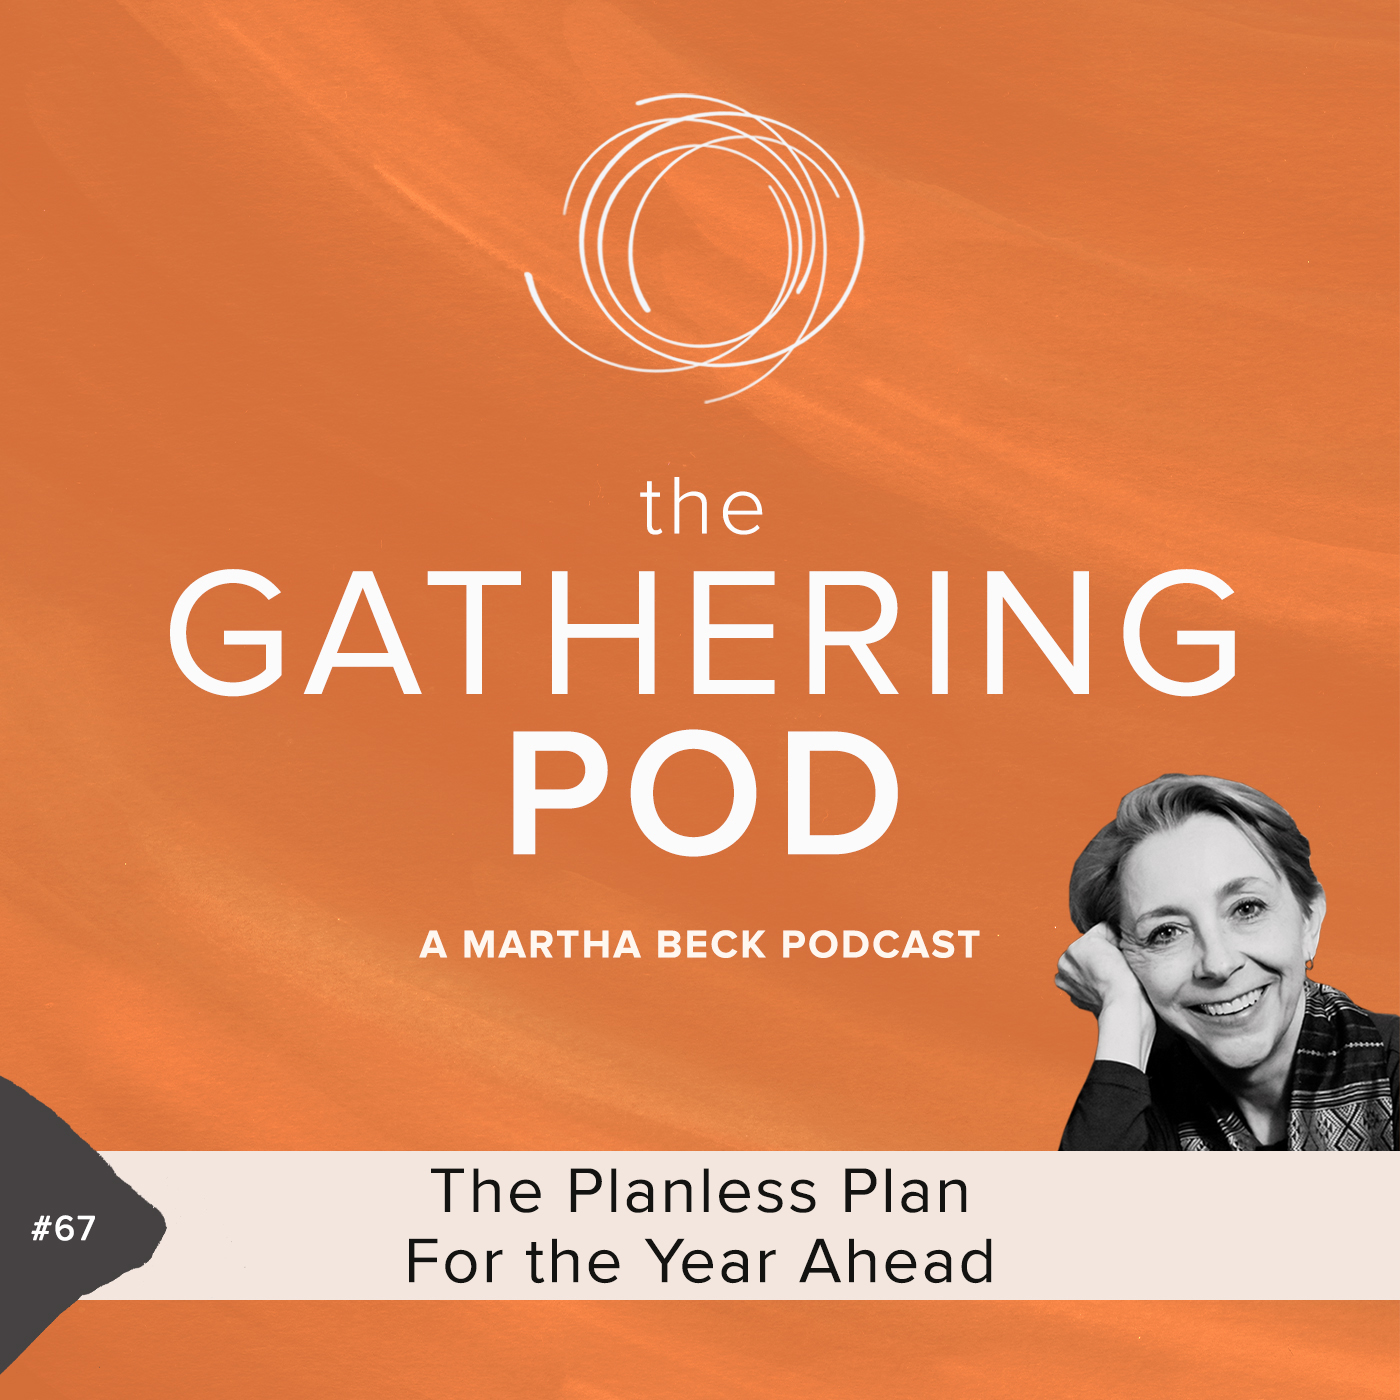 Image for The Gathering Pod A Martha Beck Podcast Episode #67 The Planless Plan For the Year Ahead